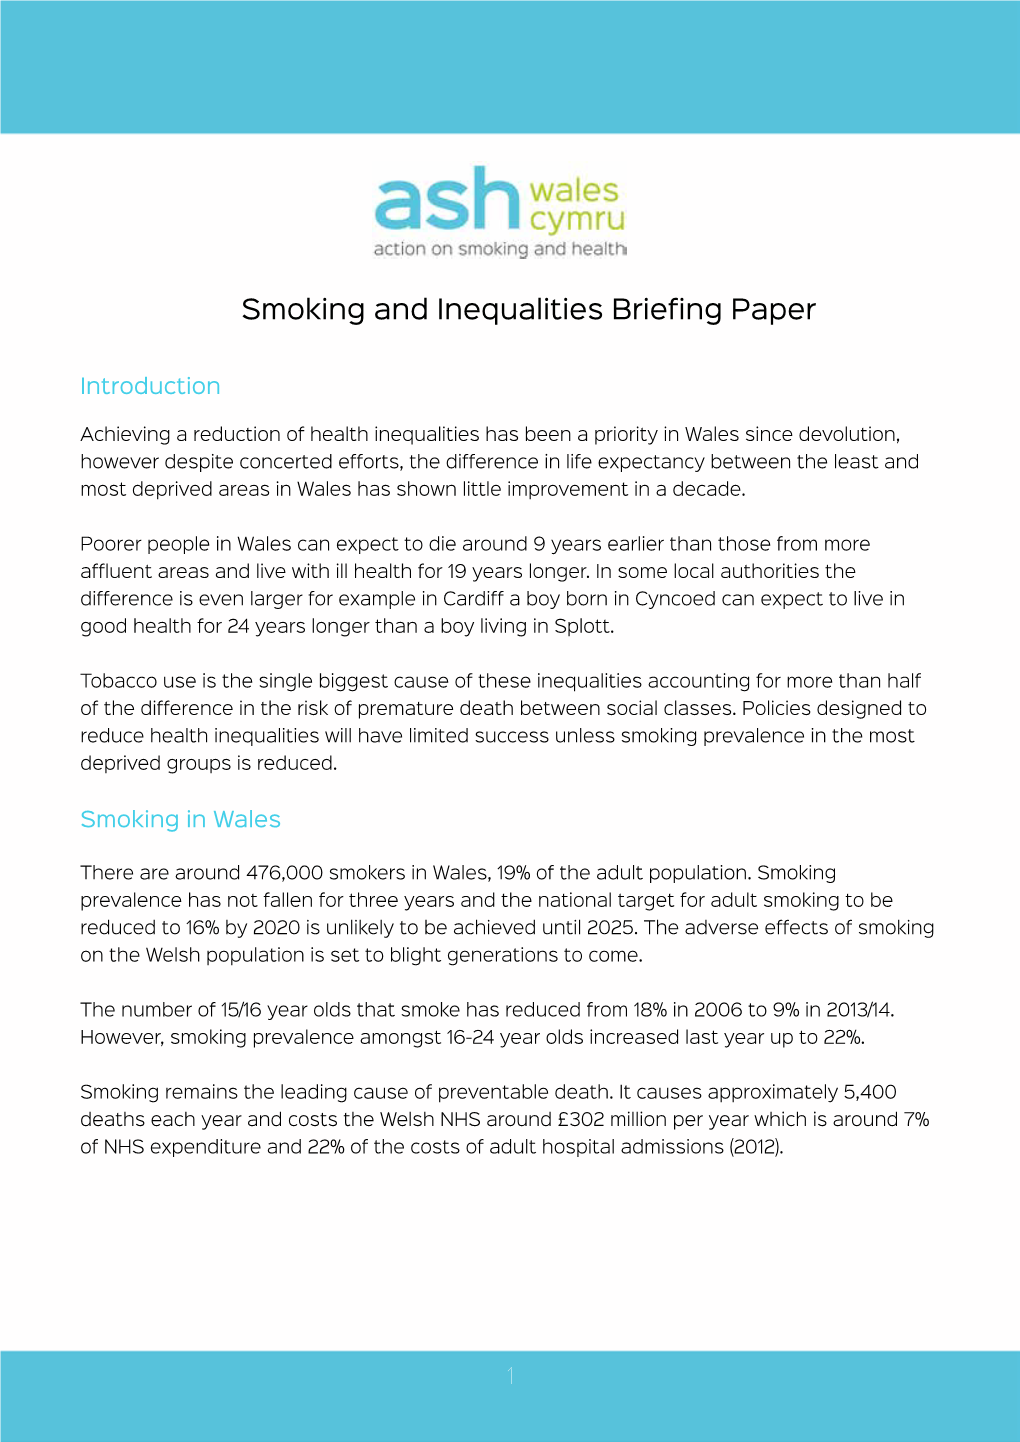 Smoking and Inequalities Briefing Paper